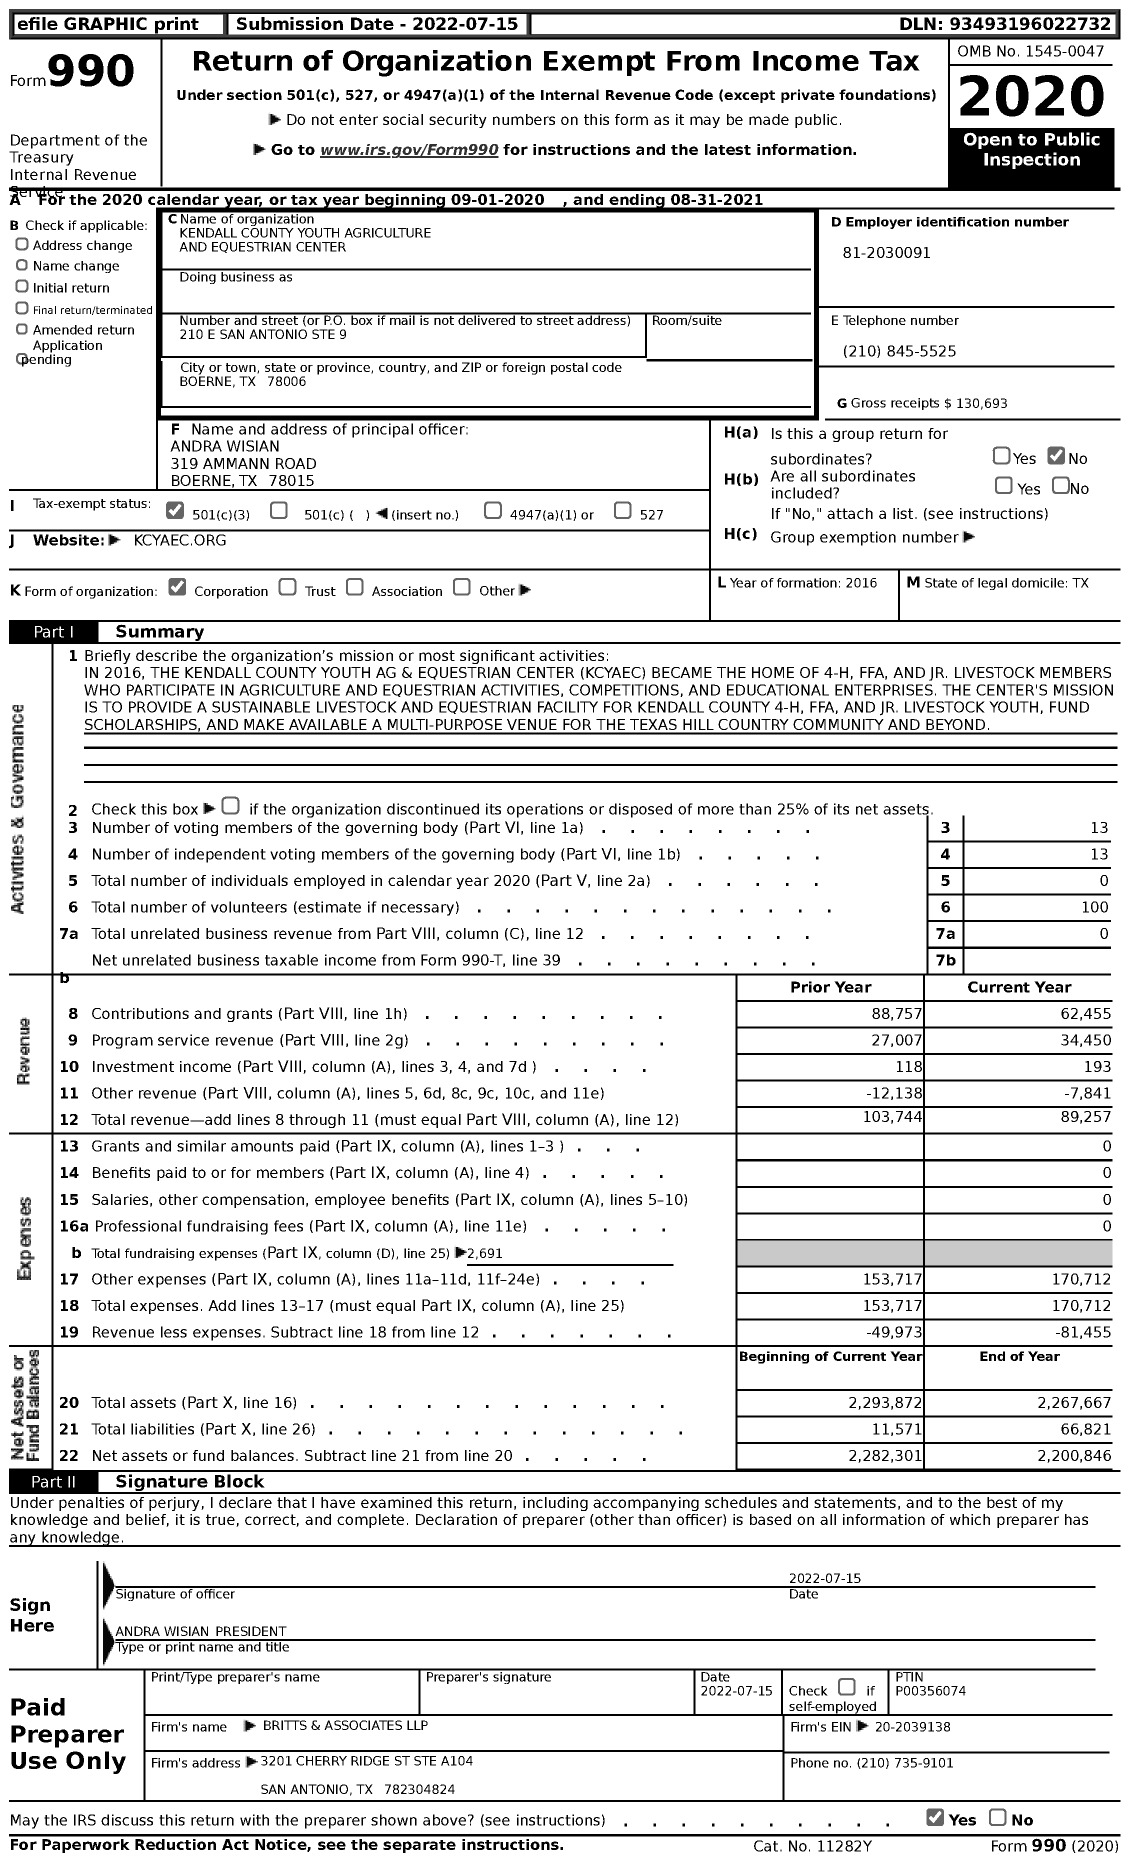 Image of first page of 2020 Form 990 for Kendall County Youth Agriculture and Equestrian Center